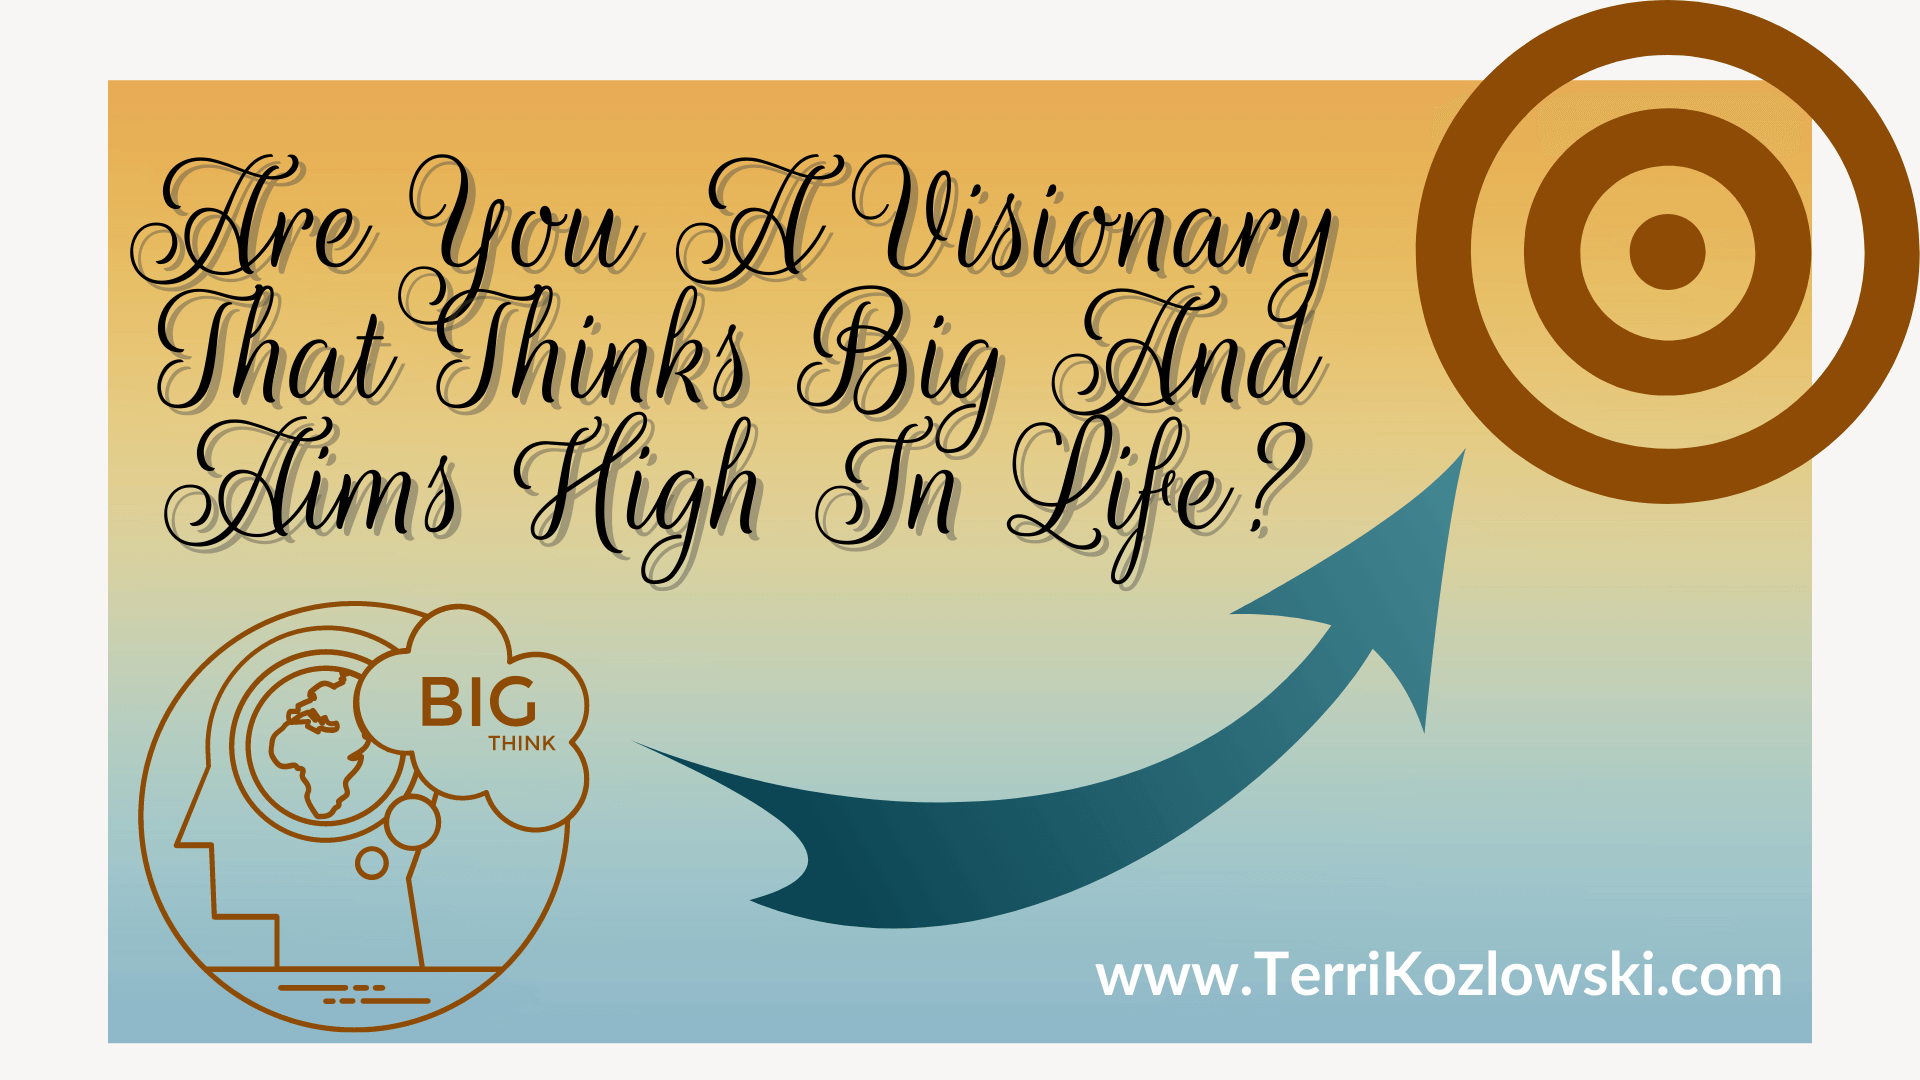 Are You A Visionary That Thinks Big And Aims High In Life?